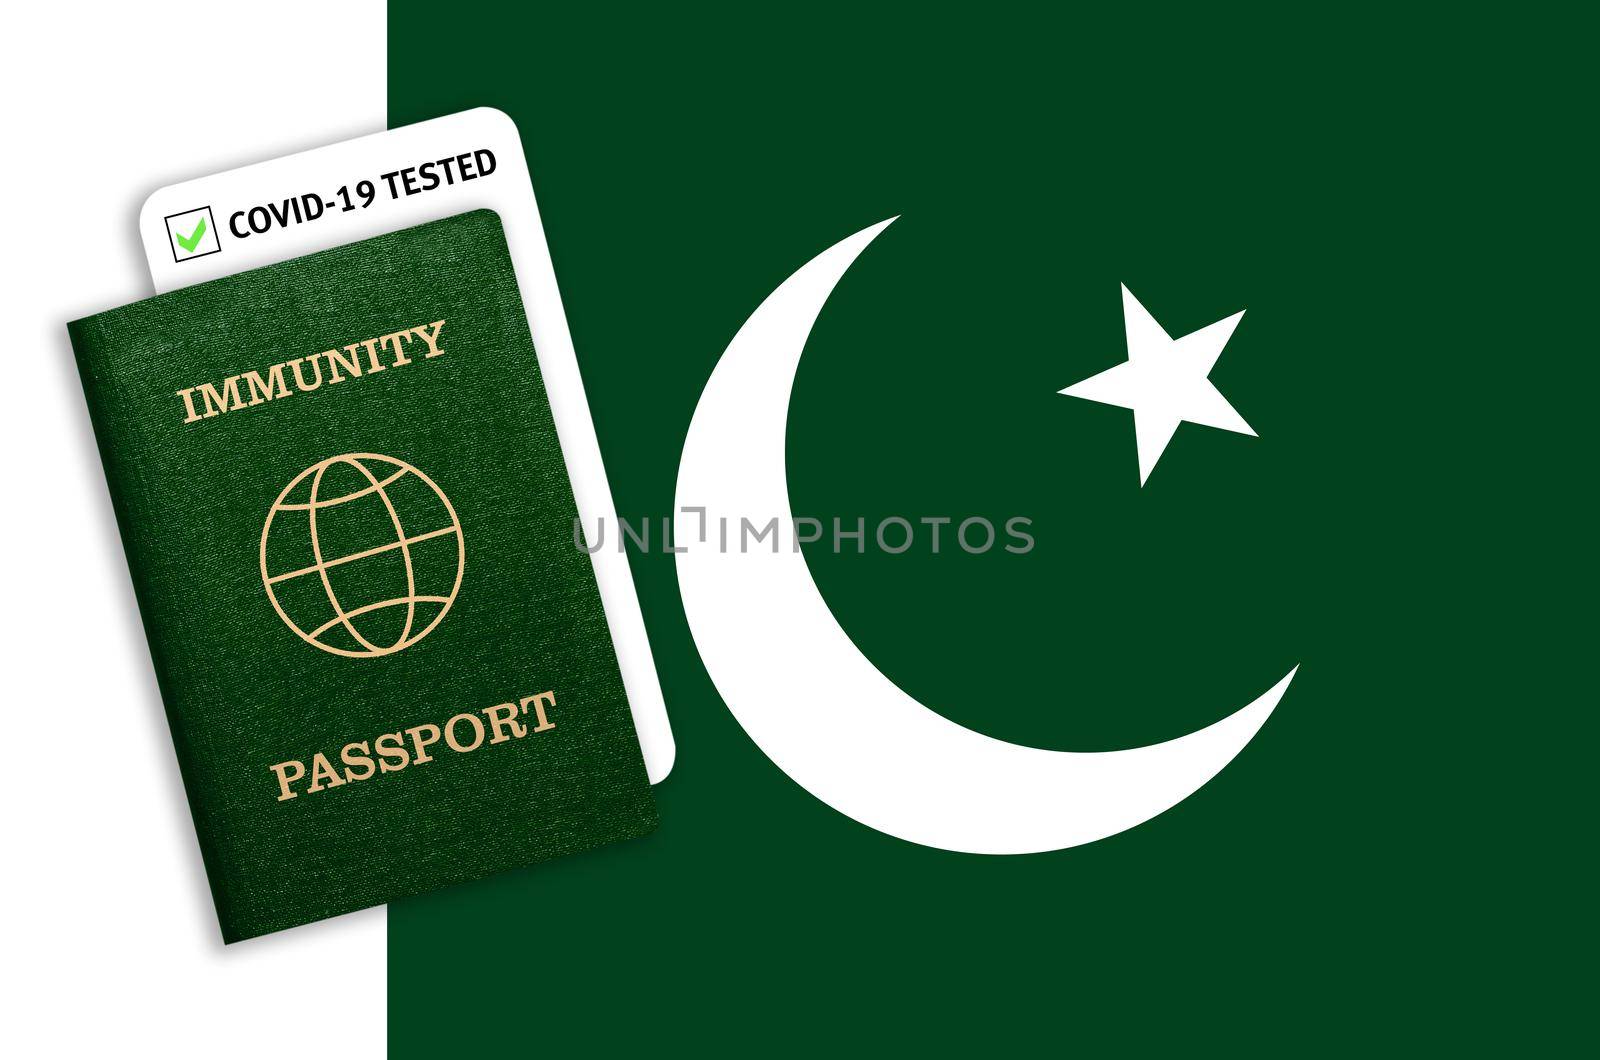 Immunity passport and test result for COVID-19 on flag of Pakistan. Certificate for people who have had coronavirus or made vaccine. Vaccination passport against covid-19 that allows you travel